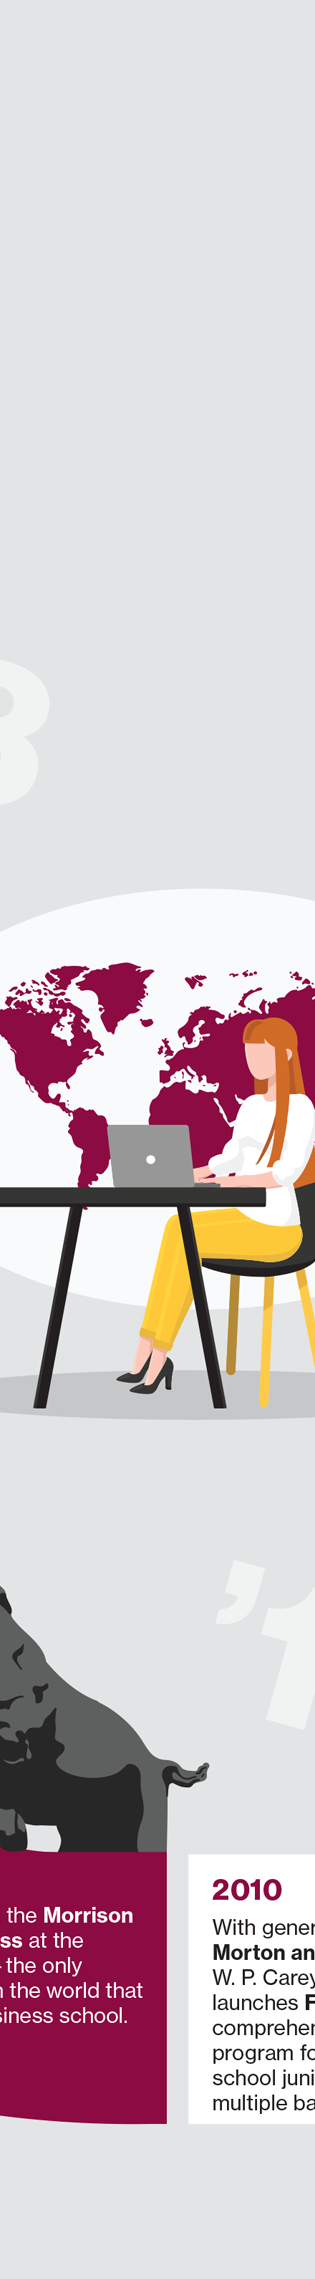 Illustration of woman sitting at desk with globe behind her